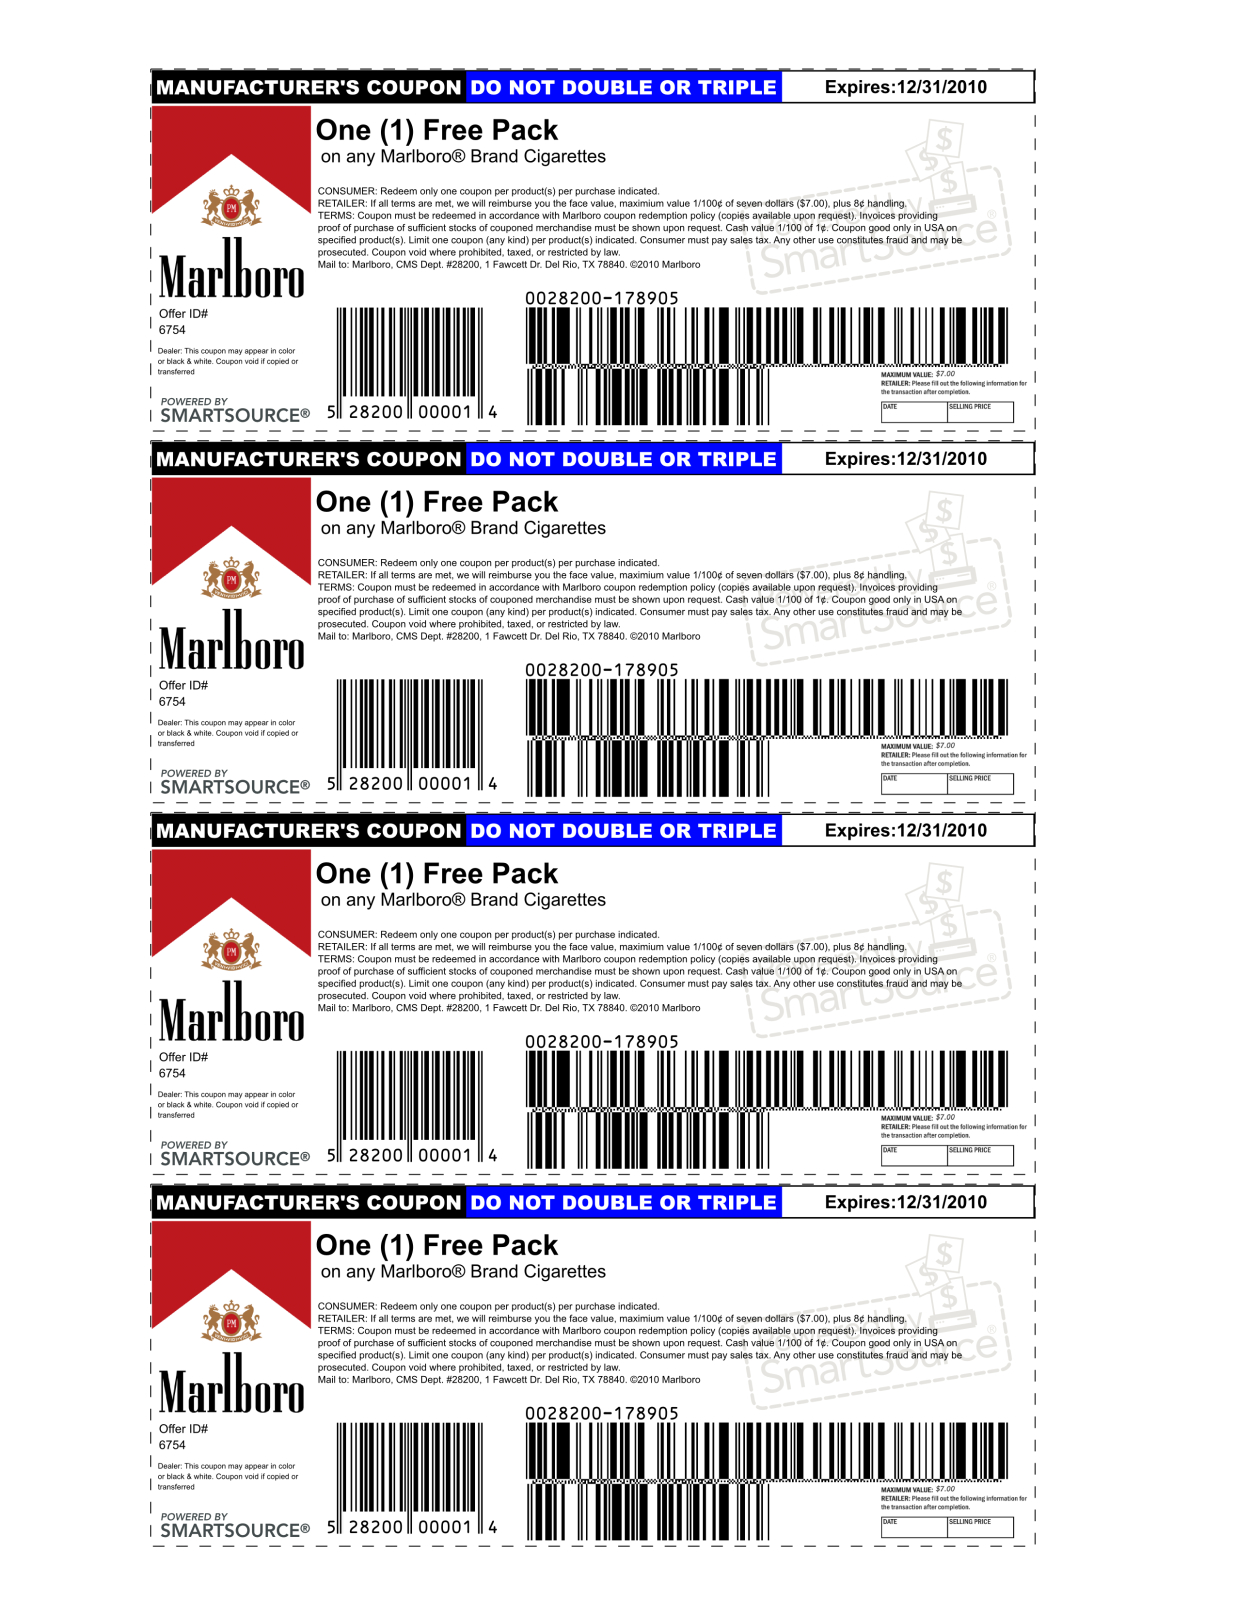 Marlboro Coupons Printable 2013 | Is Using A Possibly Fake Coupon - Manufacturer Coupons Free Printable Groceries